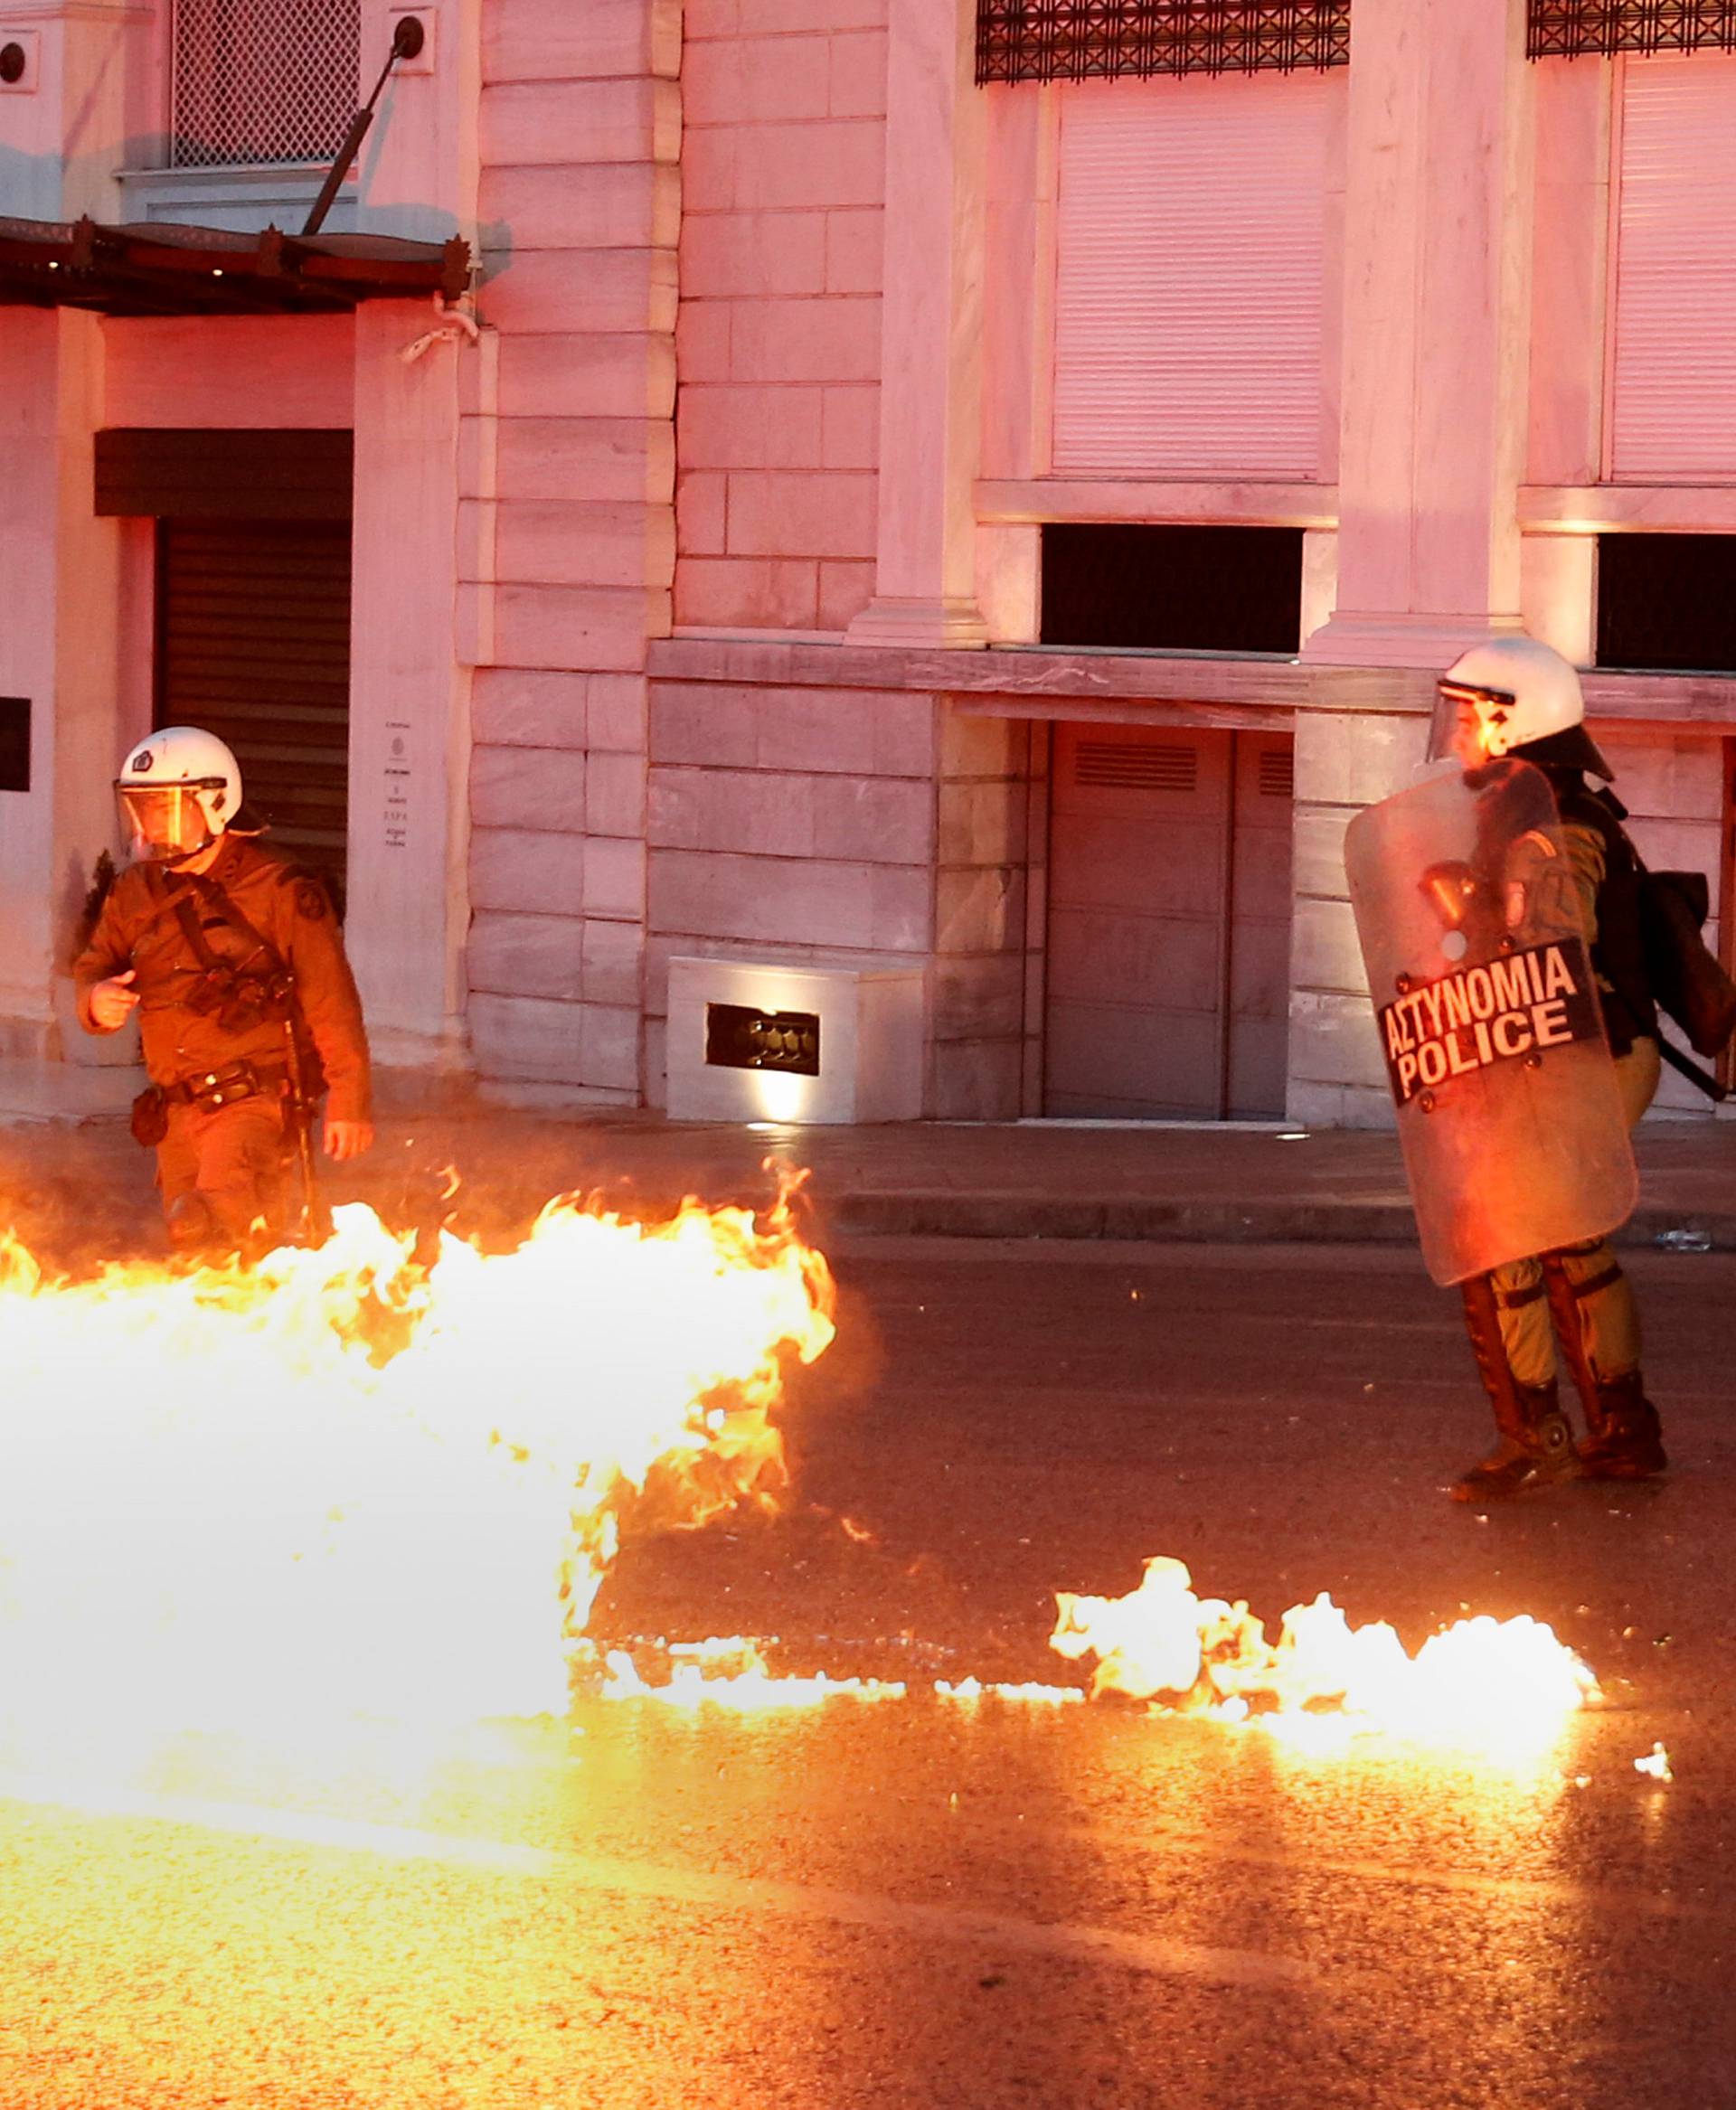 Greek riot police officers dodge a petrol bomb thrown by protesters during minor clashes following a protest outside parliament in central Athens